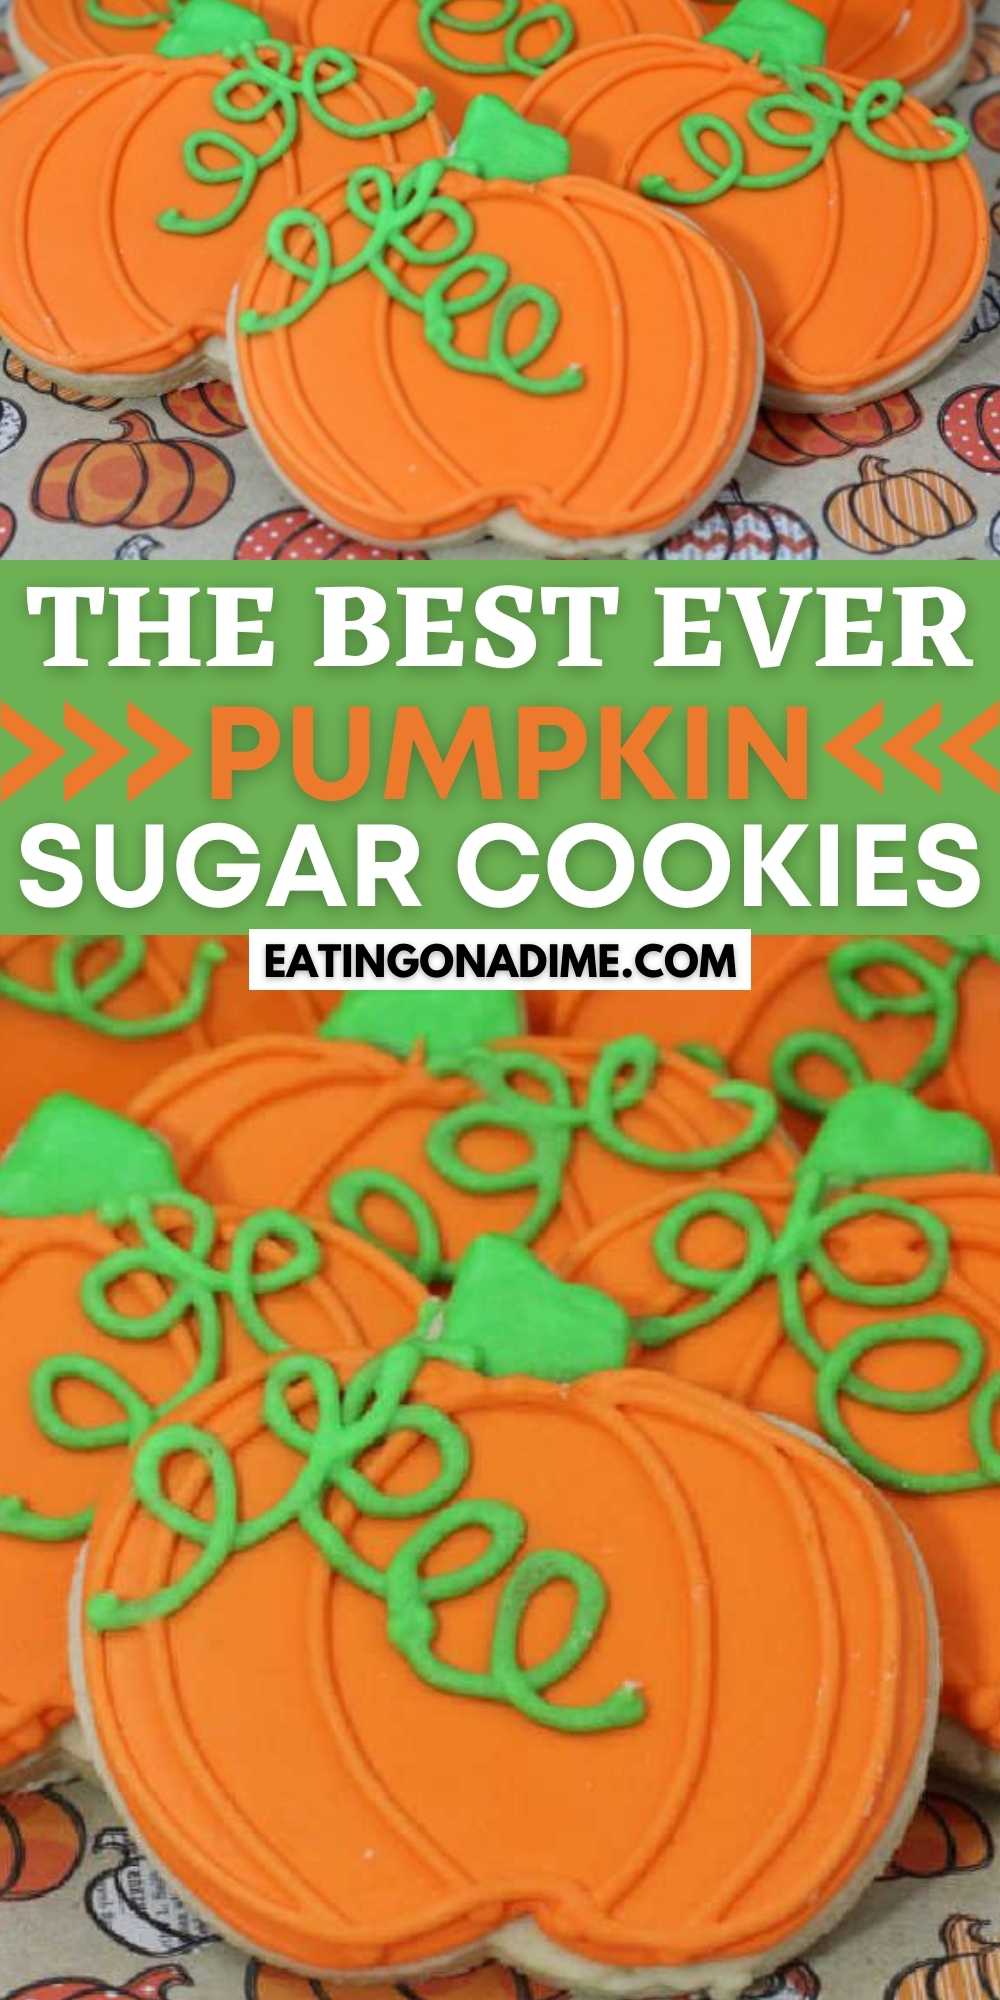 How to make and decorate these adorable pumpkin sugar cookies.Your family will love these Pumpkin Cut Out Cookies decorated with royal icing. Easy to make Pumpkin Sugar Cookie Recipe. You will love these decorated easy pumpkin cookie recipe.  #eatingonadime #cookierecipes #halloweenrecipes #pumpkinrecipes 
